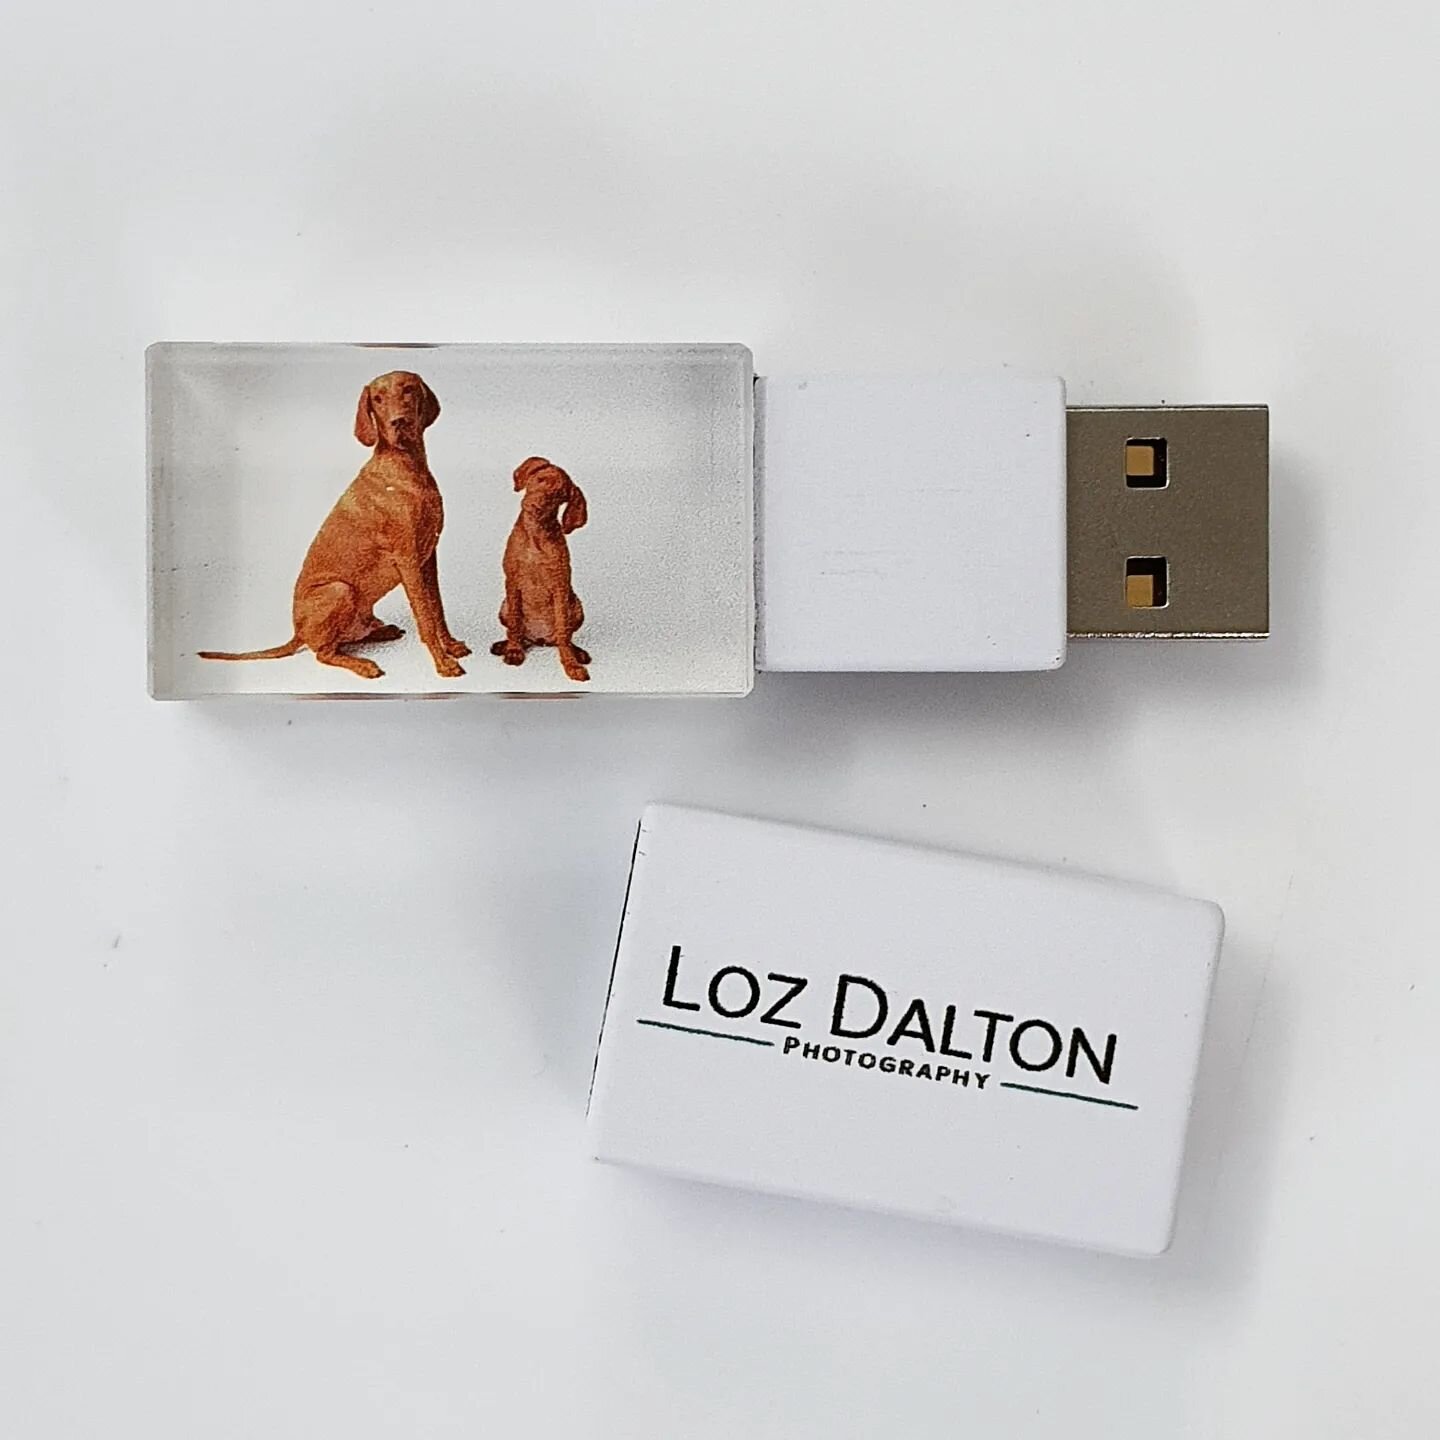 🐾 Crystal USBs.  No minimum order. Personalise every woof.

White, black, rose gold, gold, silver, maple &amp; walnut. 
2, 4, 8, 16, 32 &amp; 64gb available.

Pro photographers - Make sure you apply for wholesale pricing on our website. 

www.thepho